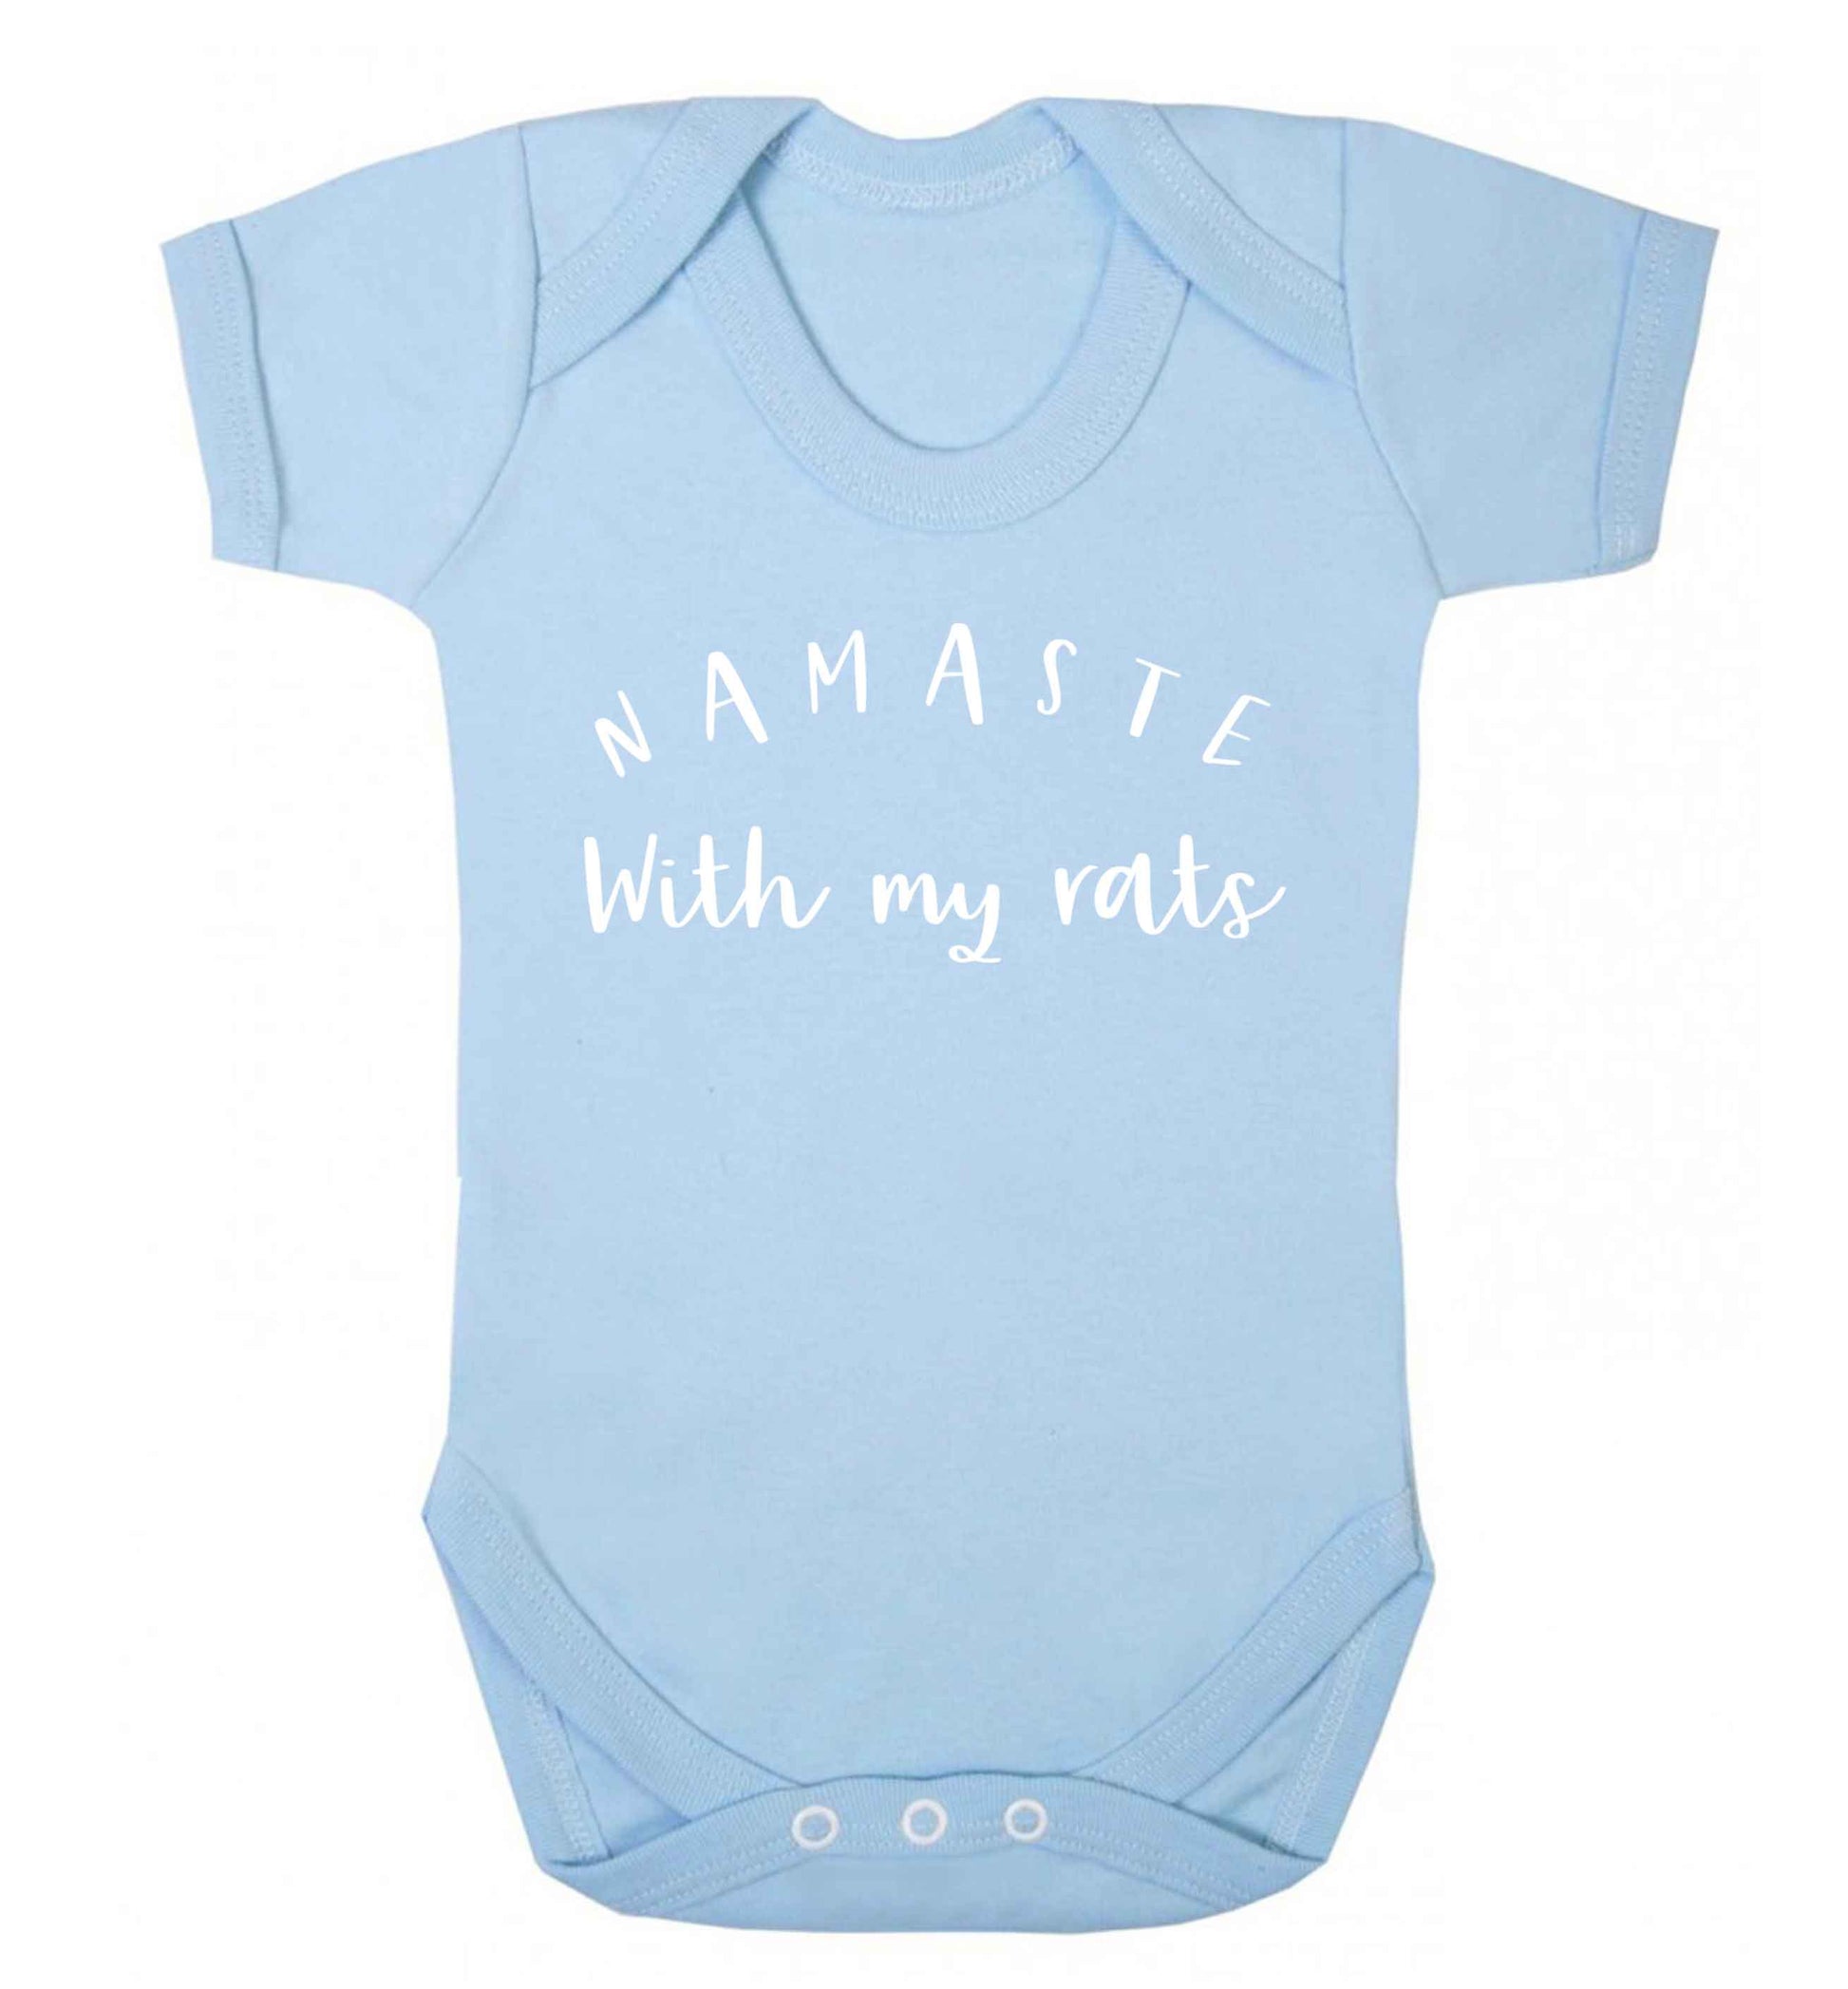 Namaste with my rats Baby Vest pale blue 18-24 months